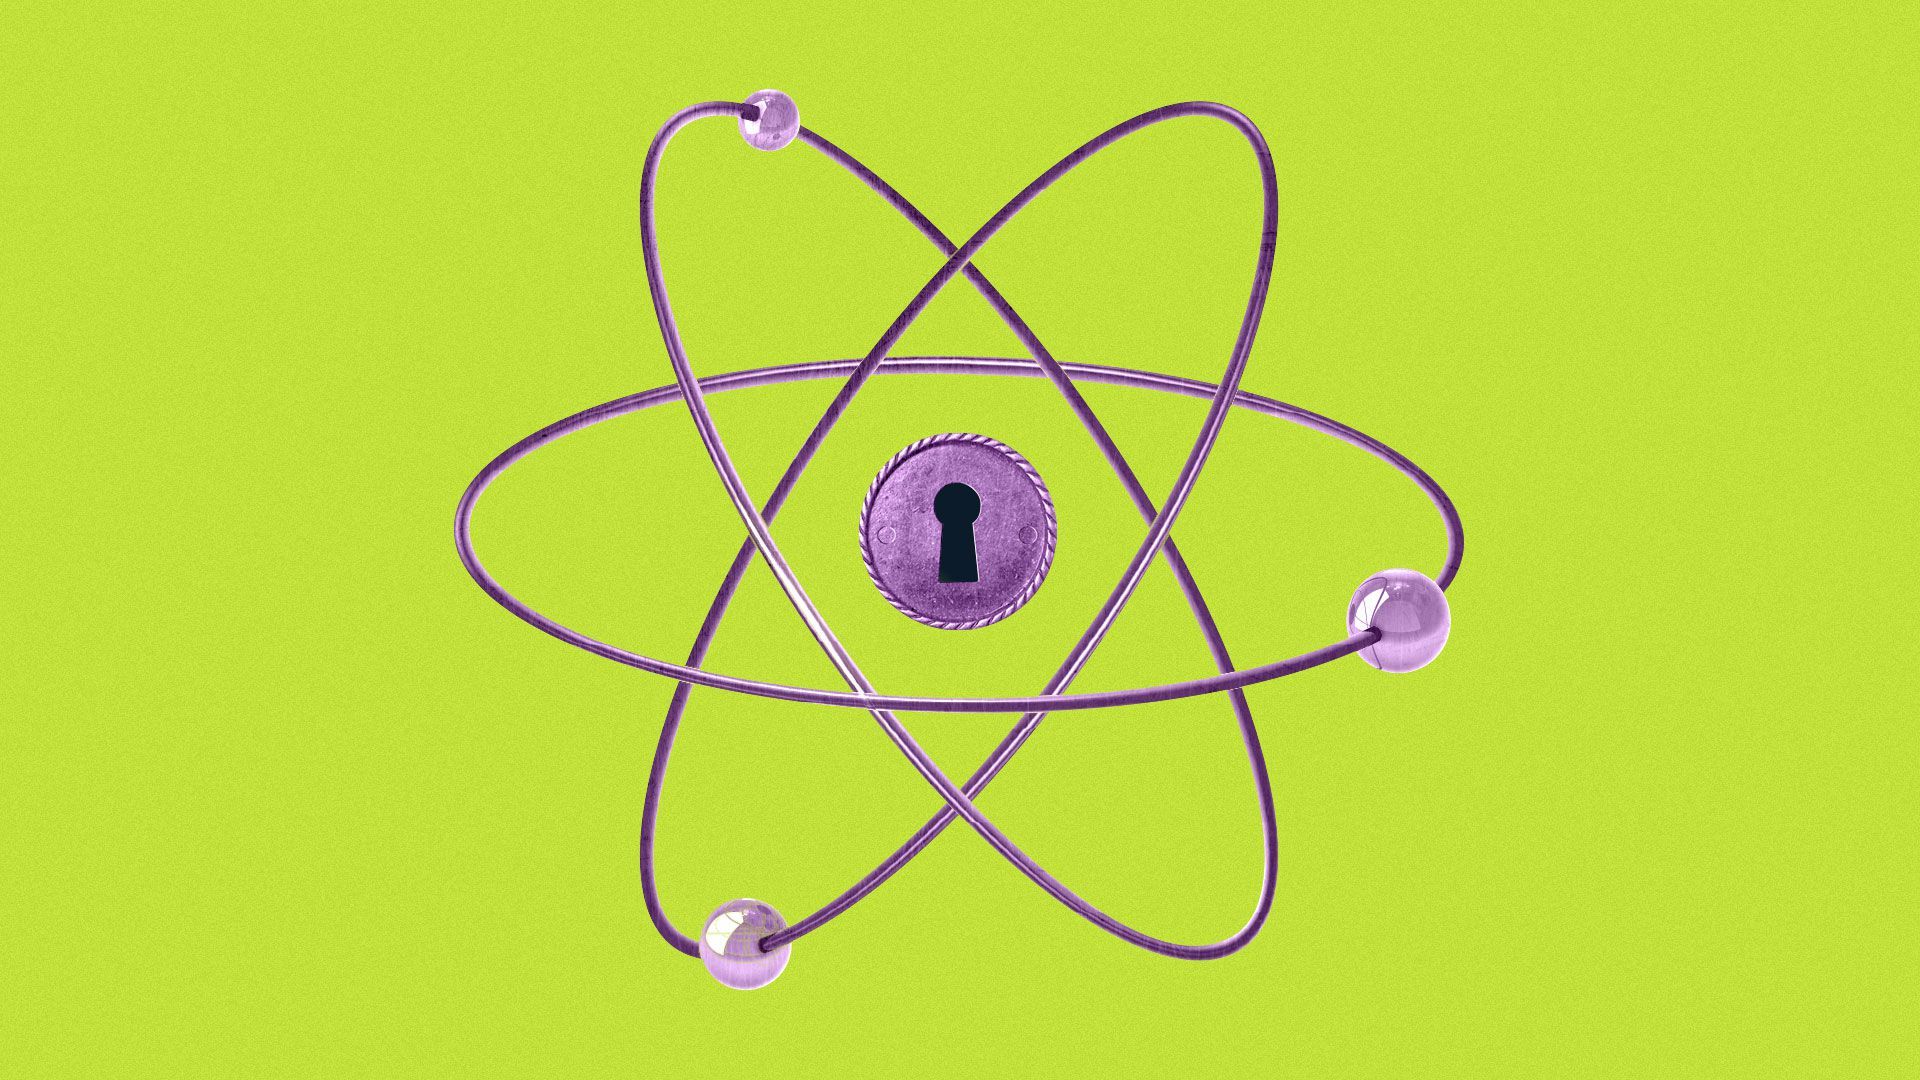 Illustration of atom with a lock in the middle